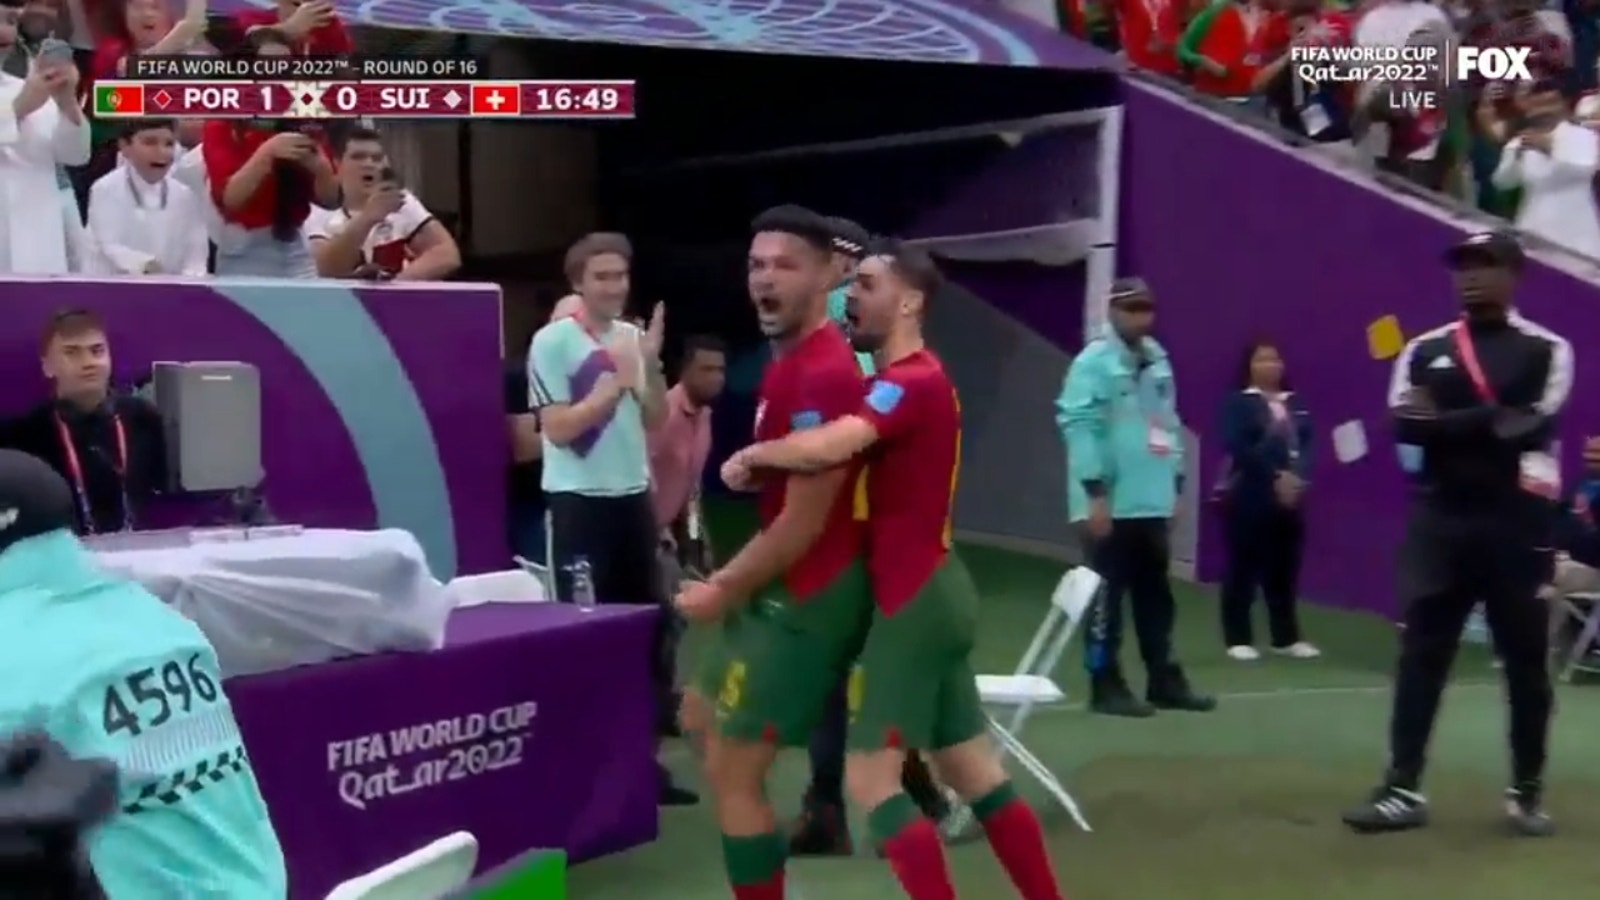 Portugal's Goncalo Ramos scores a hat-trick against Switzerland